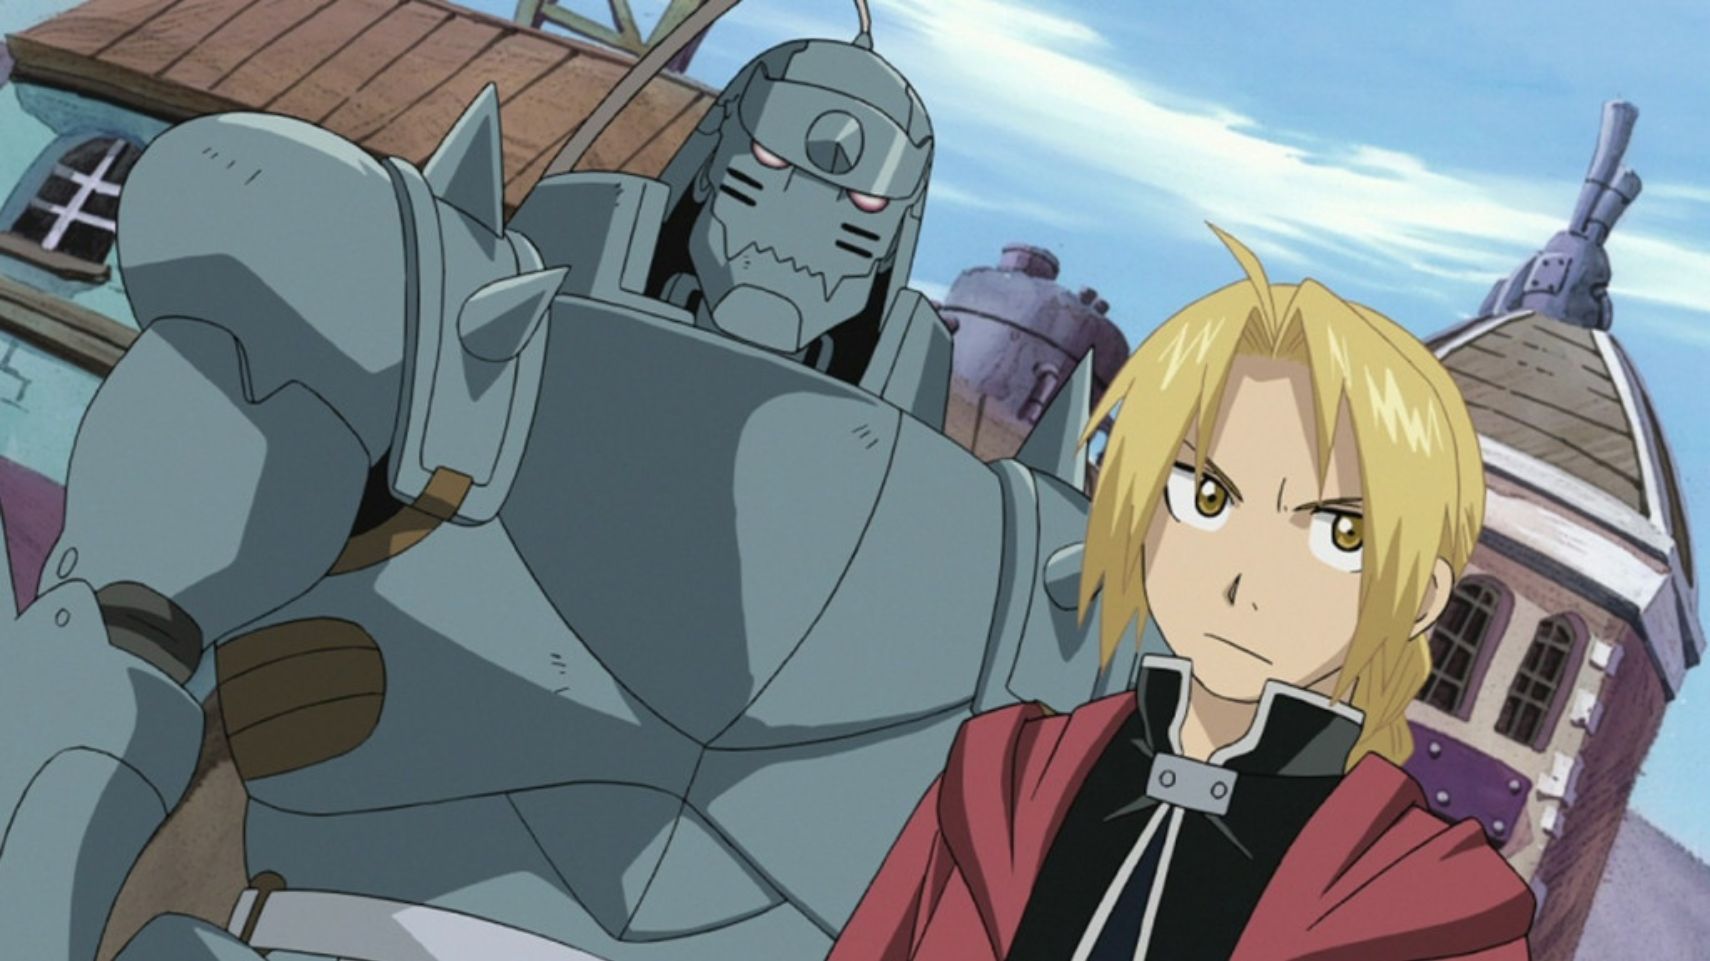 Fullmetal Alchemist Publisher Teases New Project for 20th Anniversary